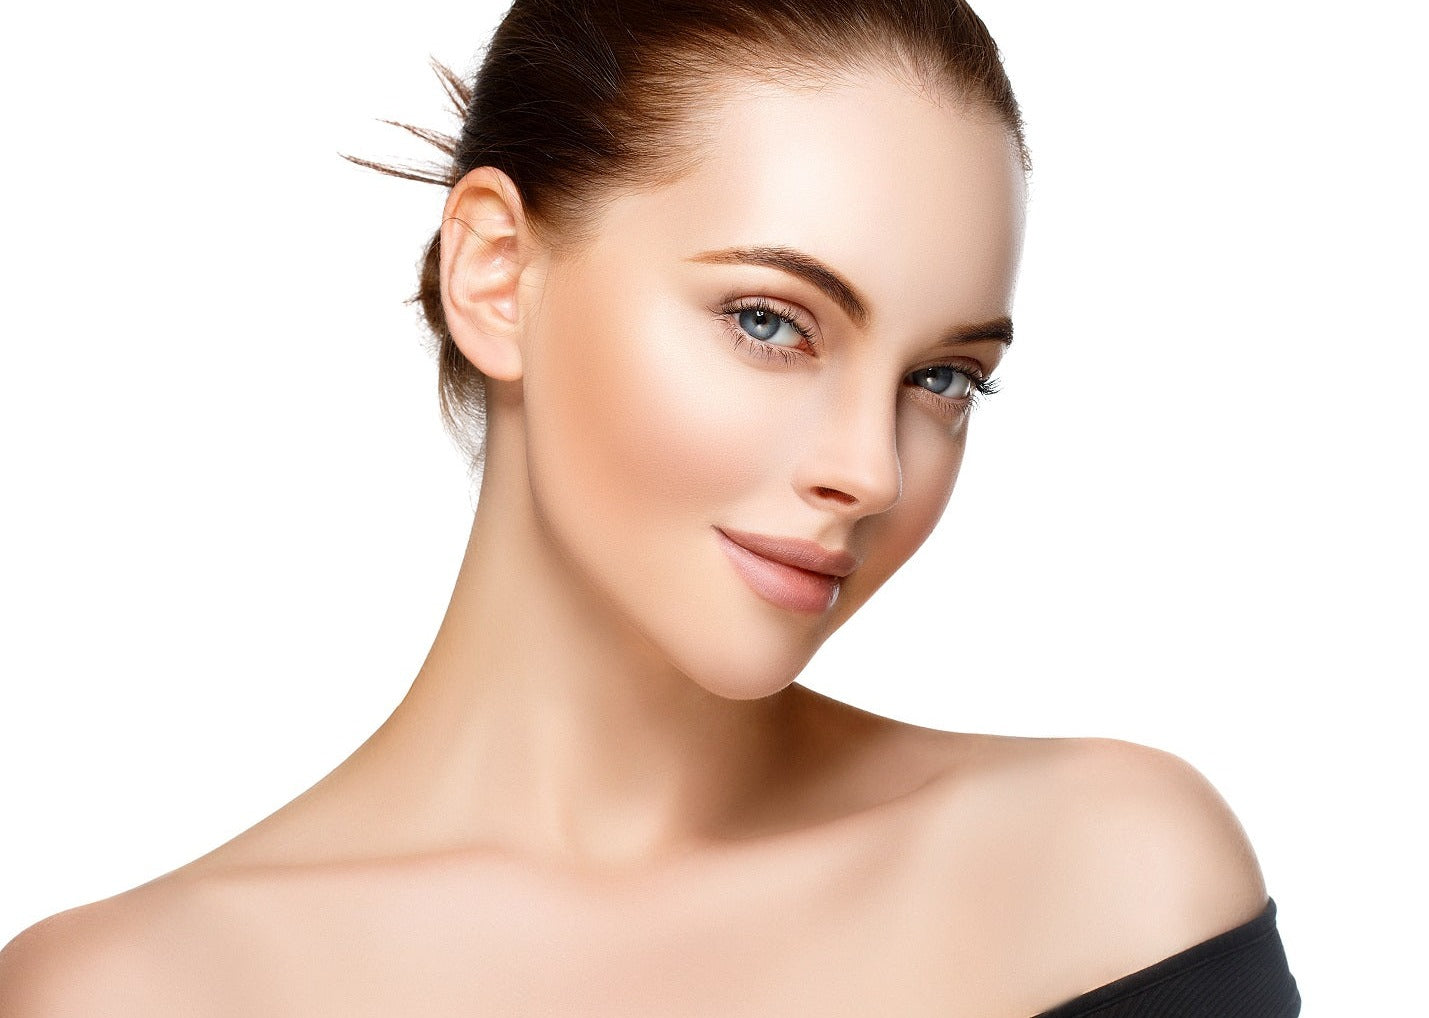 Facial Aesthetics Package: Anti-Wrinkle, Profhilo & Under Eye Boosters (save €396)